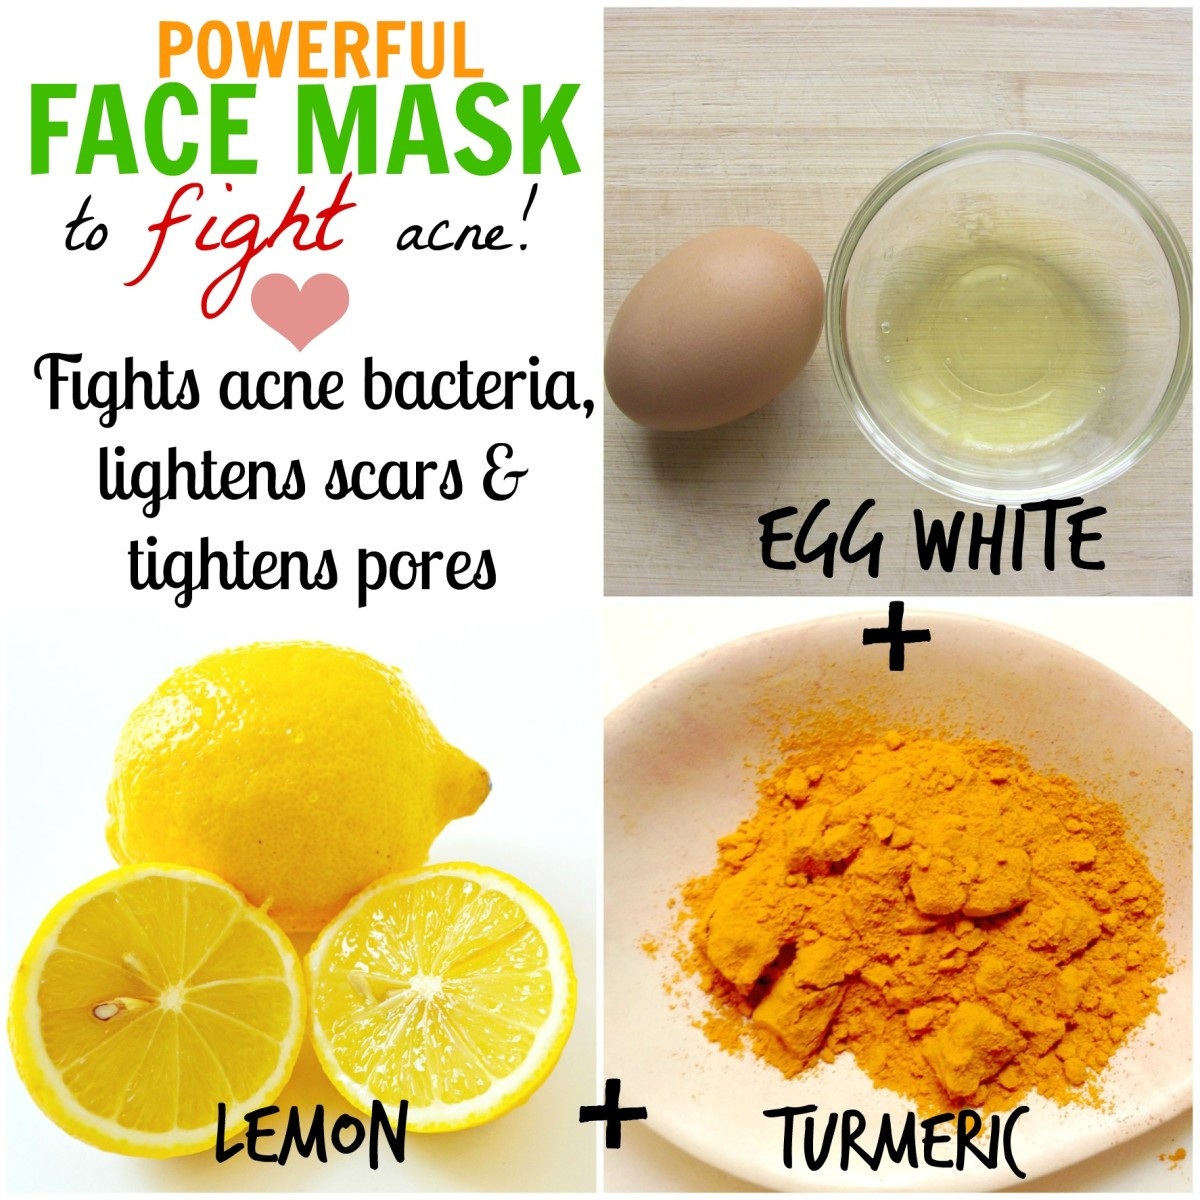 DIY Face Mask For Dry Skin And Acne
 DIY Homemade Face Masks for Acne How to Stop Pimples